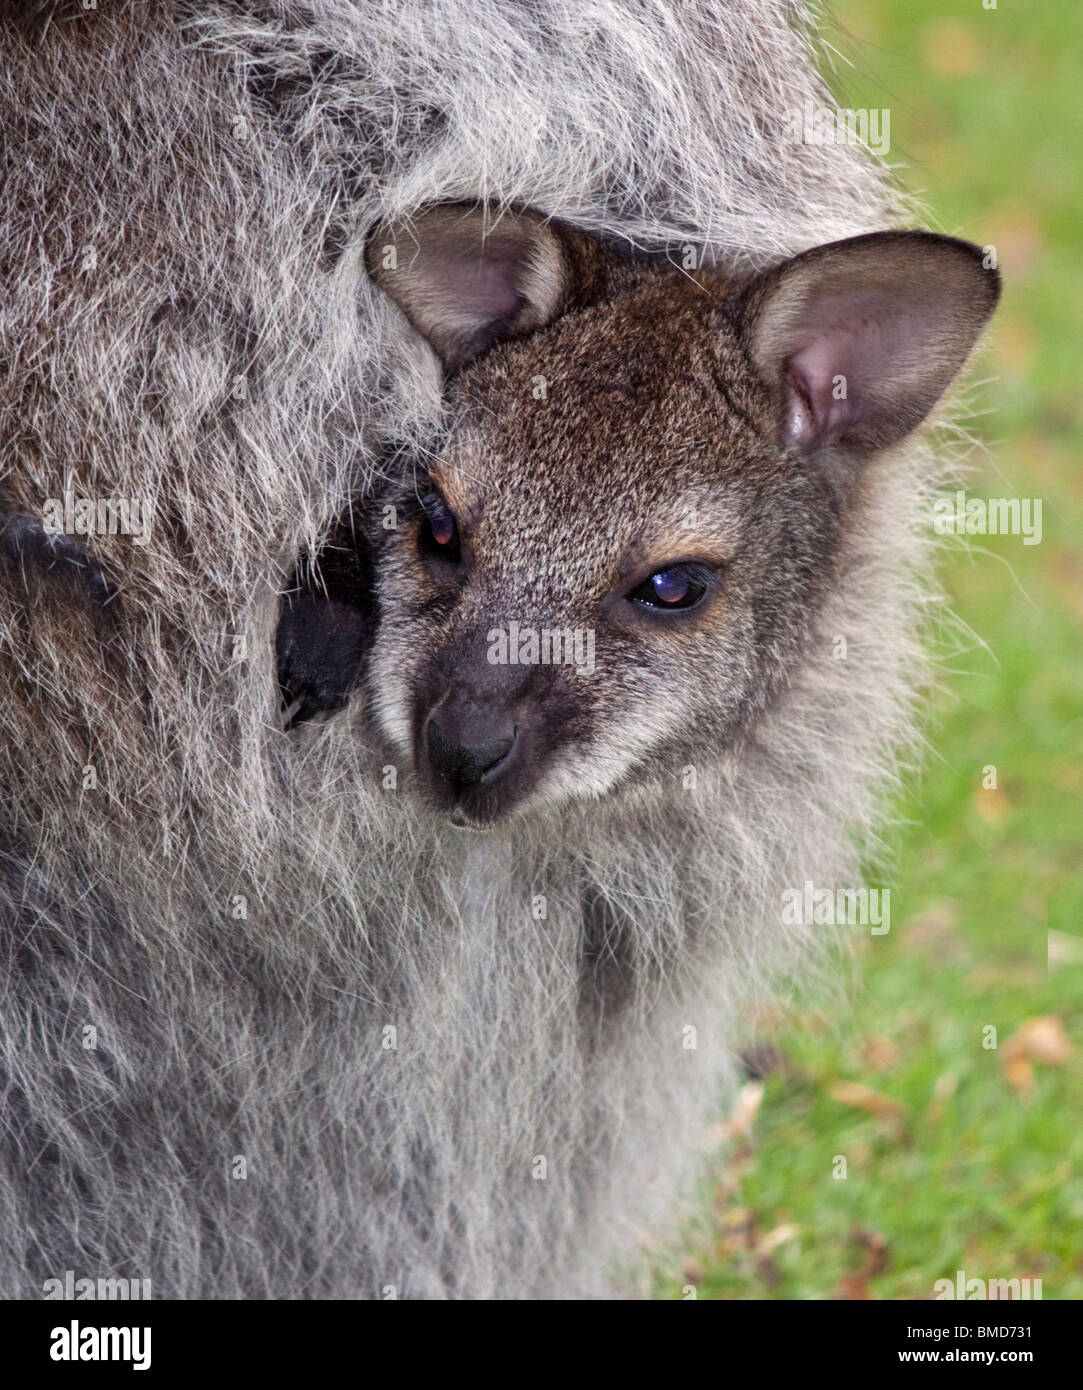 Wallaby Joey in Pouch Stock Photo